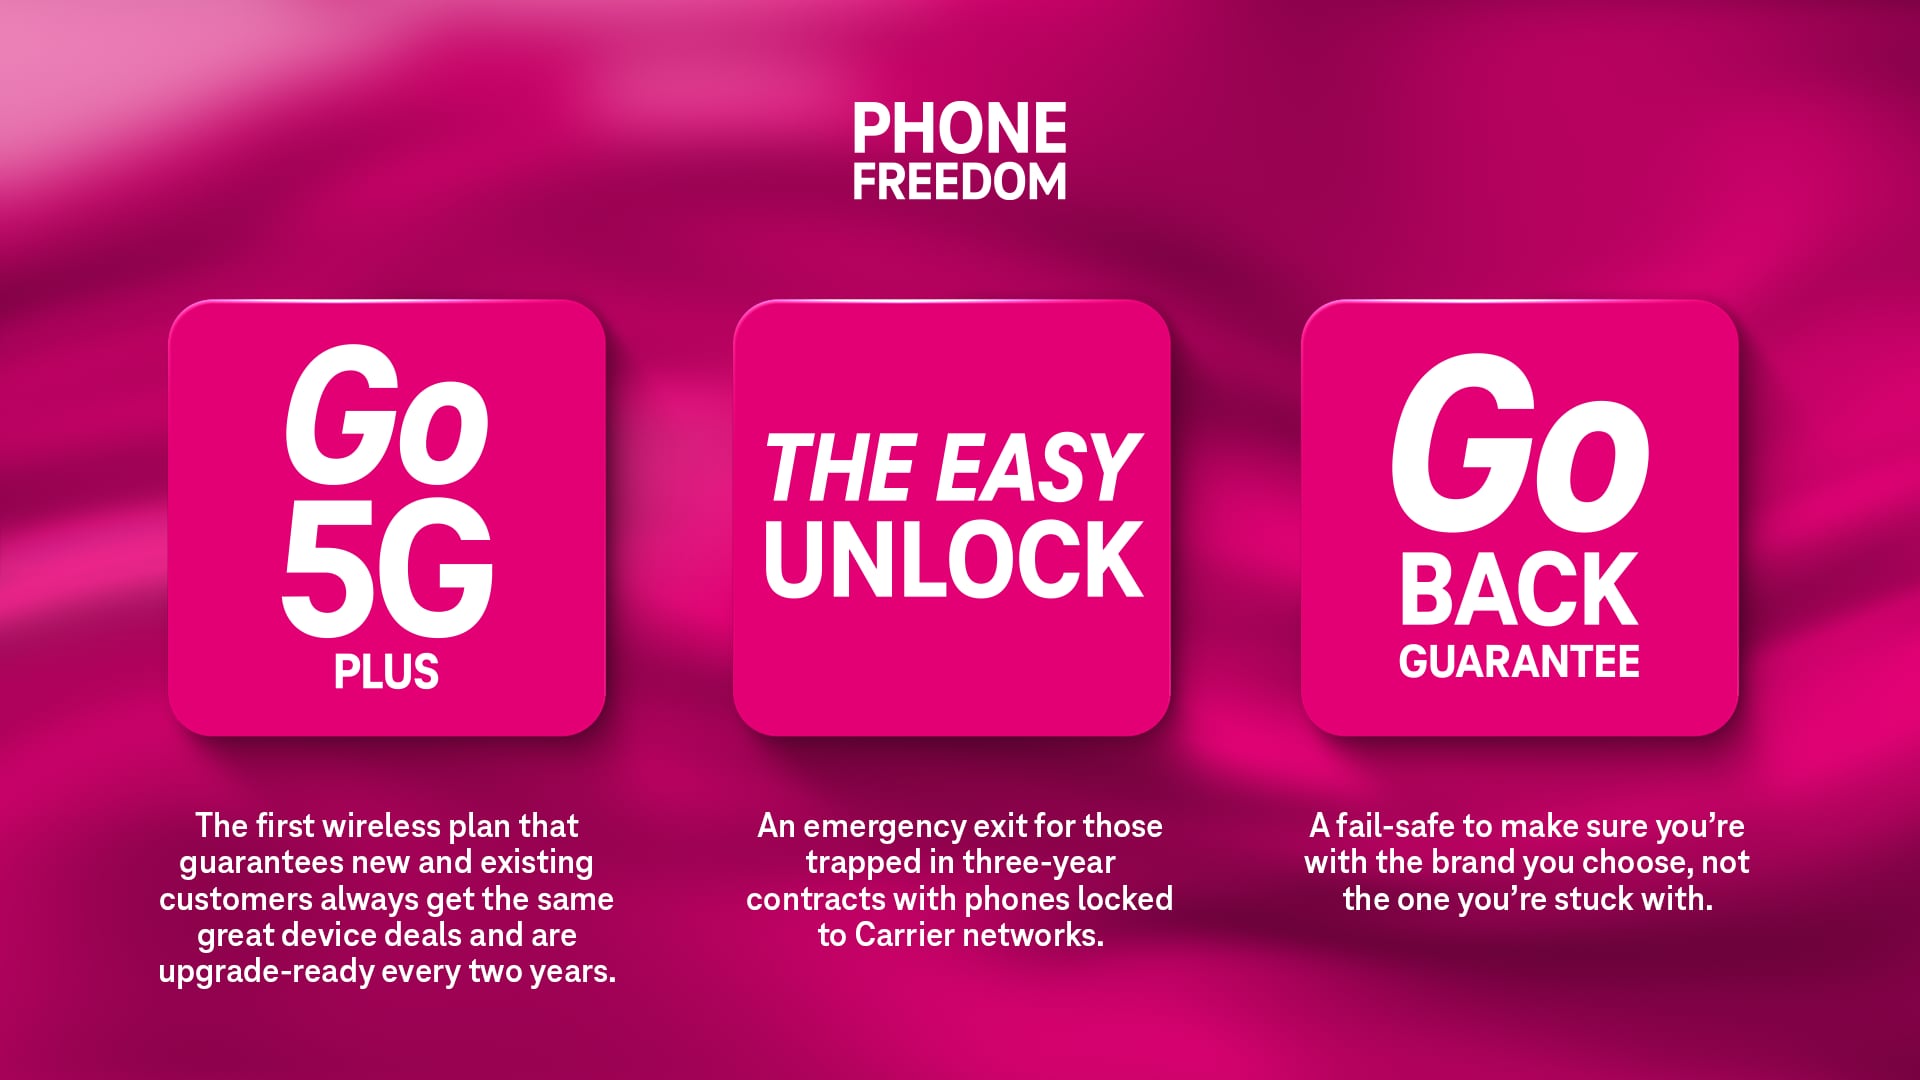 Introducing T‑Mobile's Latest Un‑carrier Move “Phone Freedom” ‑ T‑Mobile Newsroom